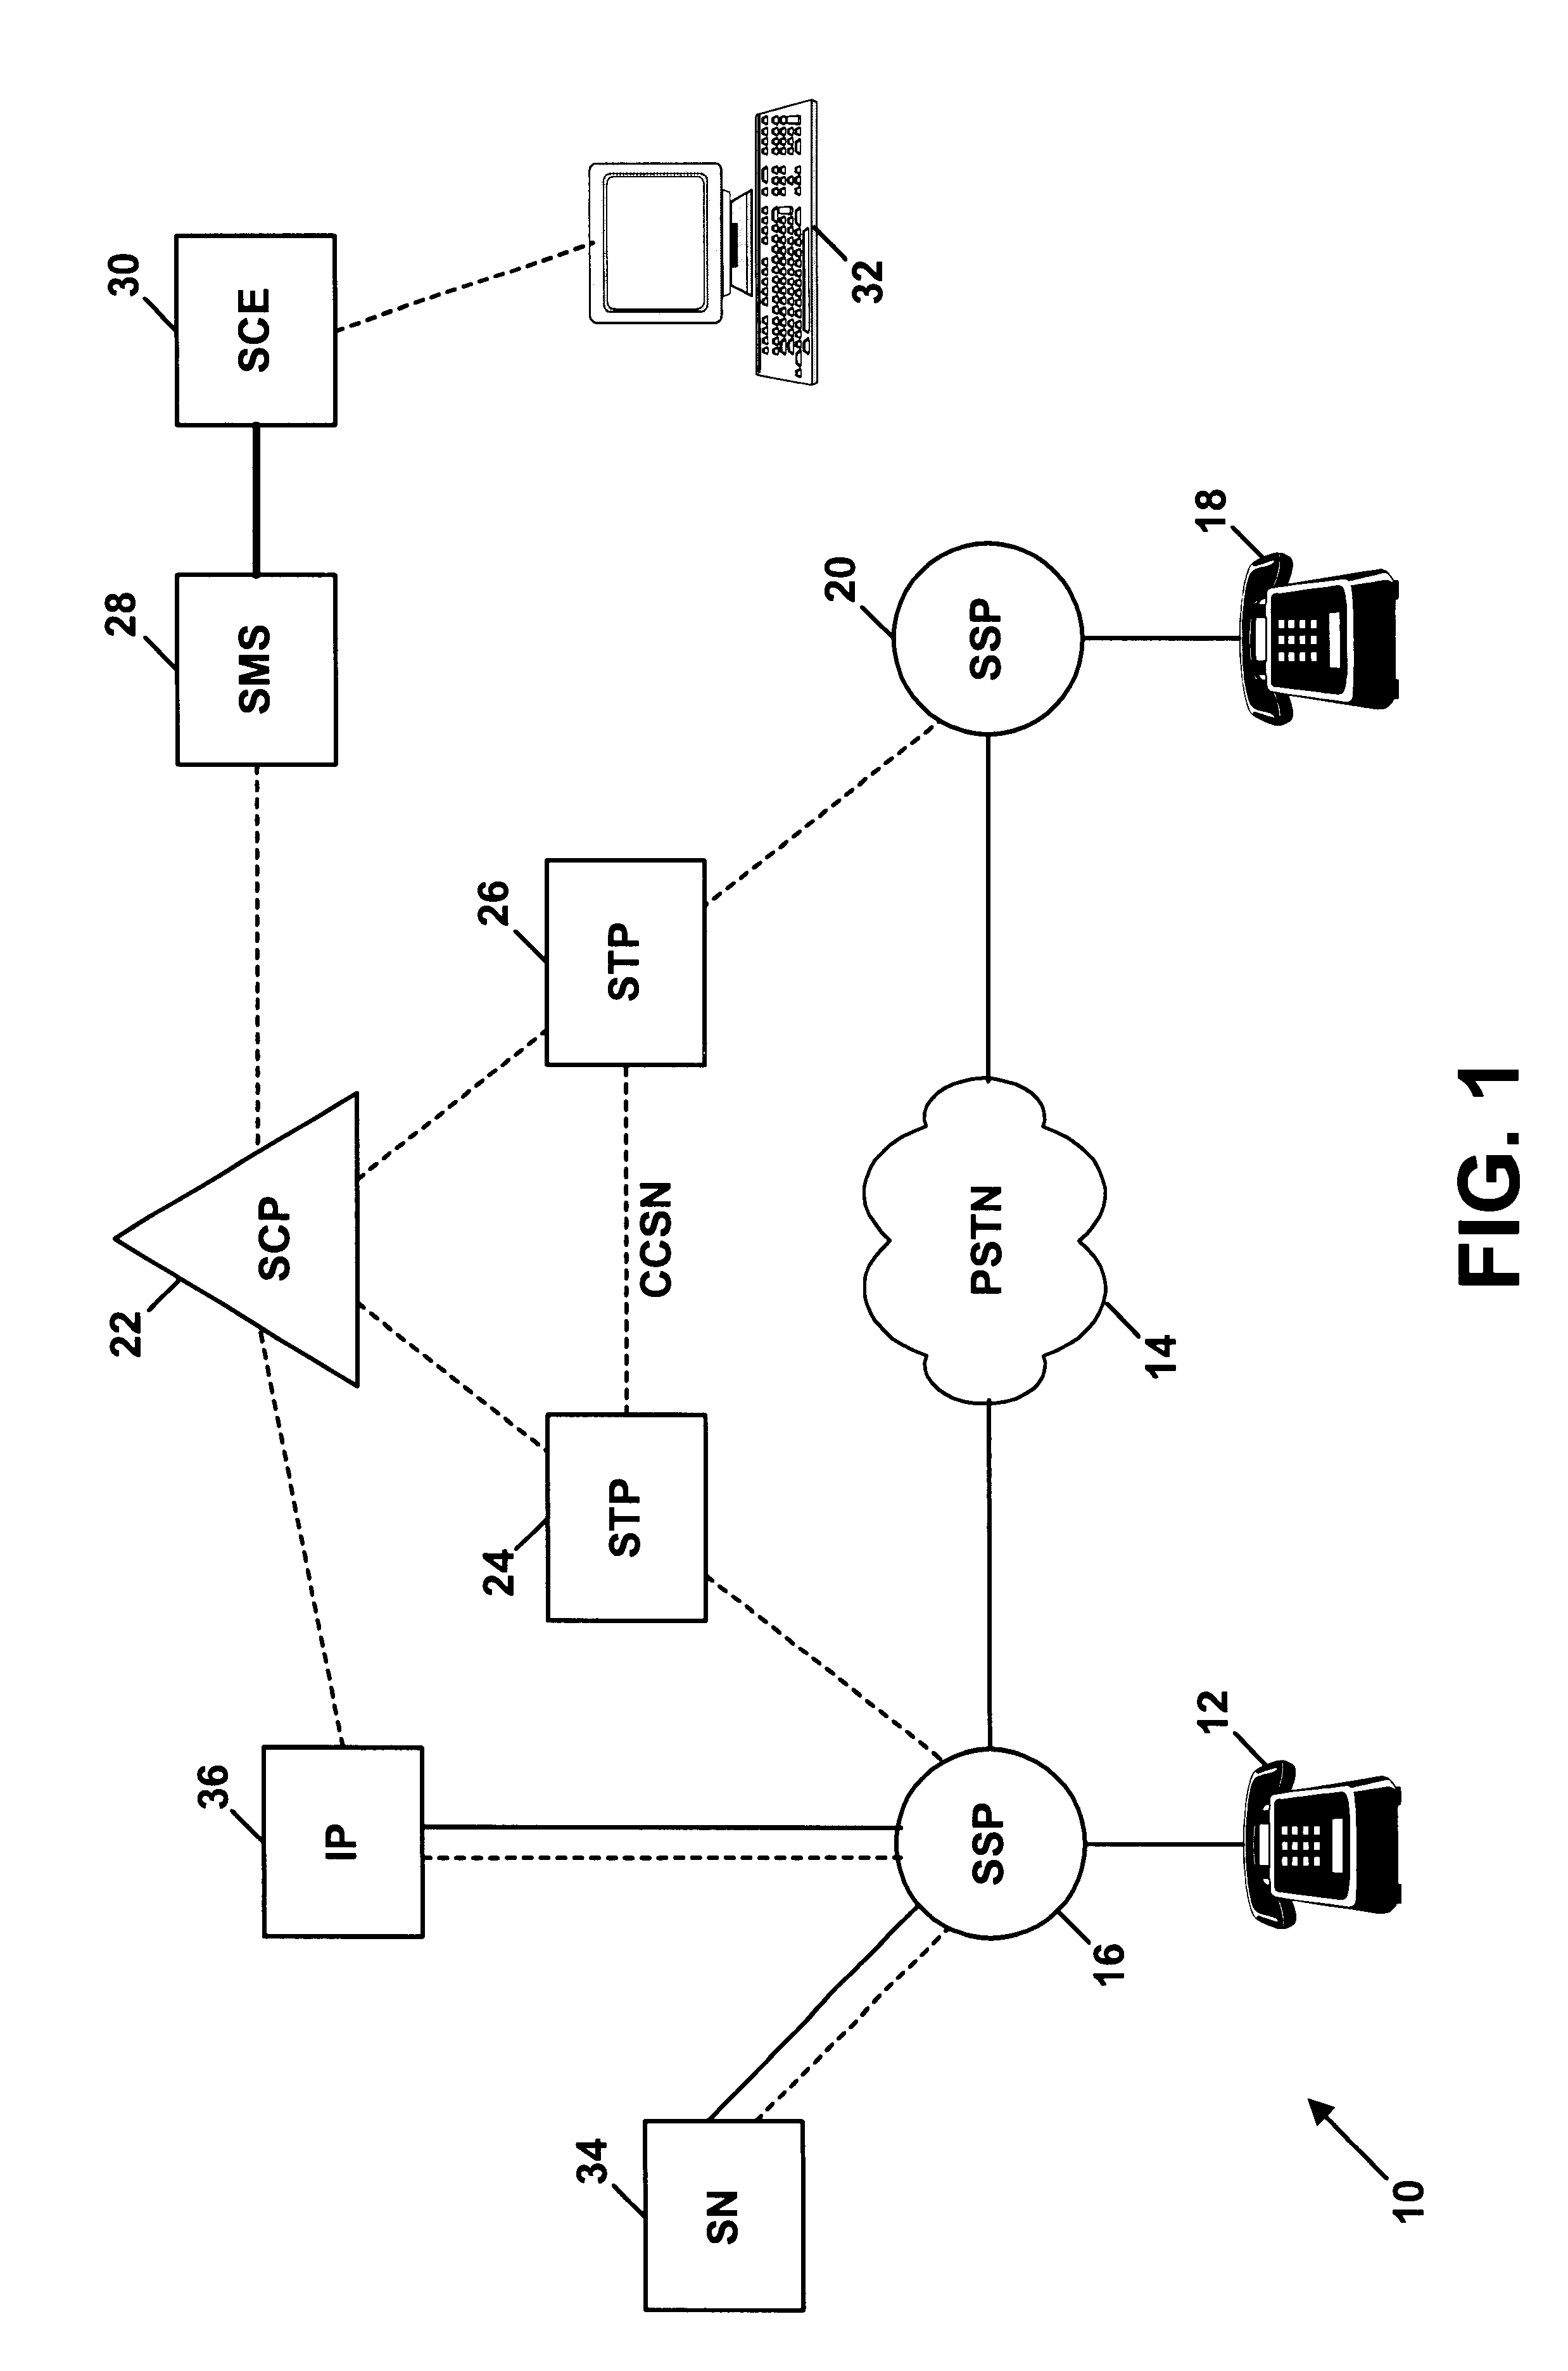 Method and system for monitoring telecommunications traffic